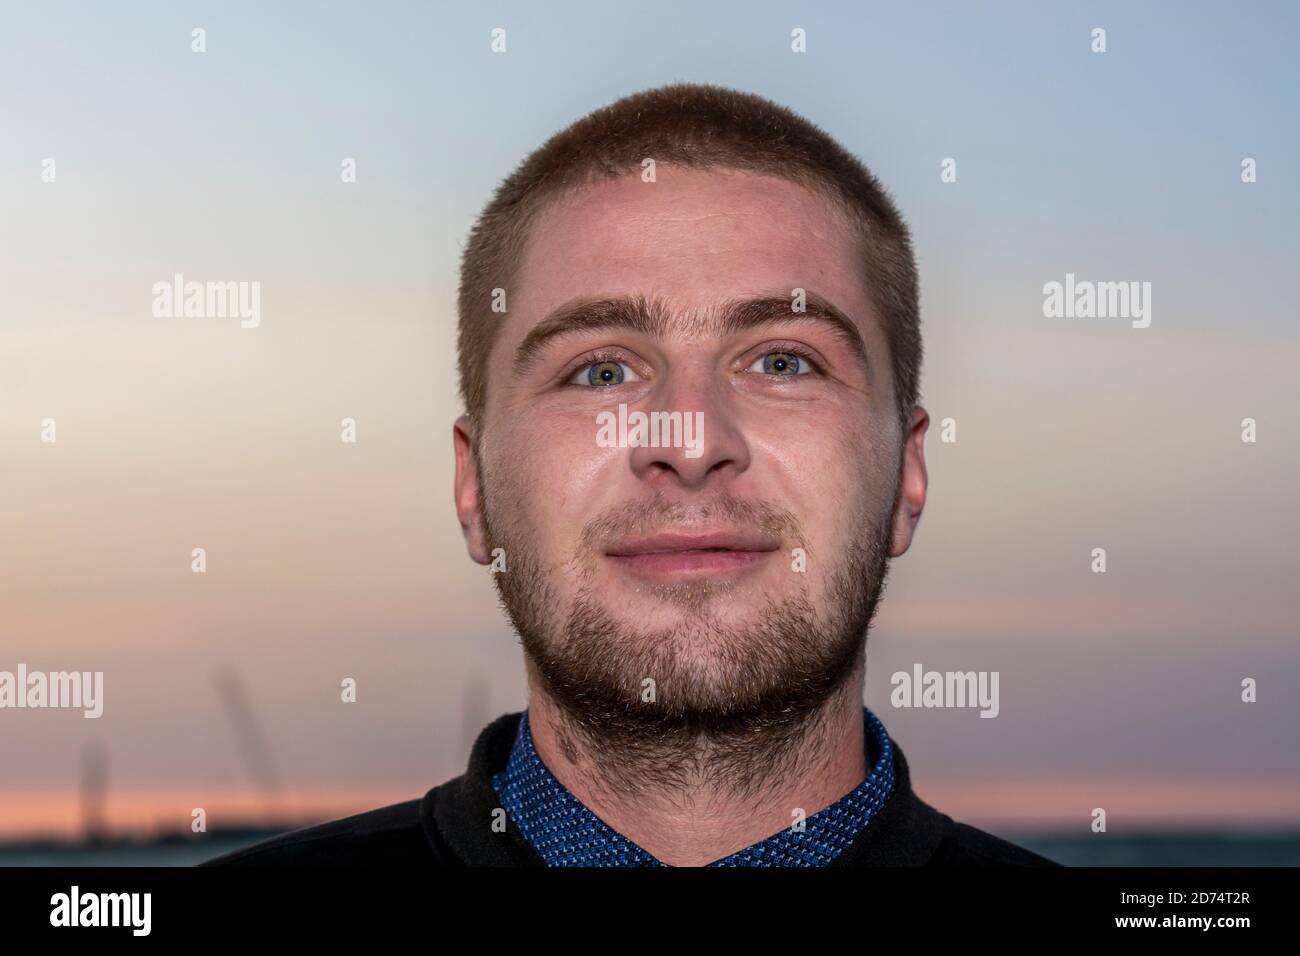 Close-up face of young Caucasian man against the sky at sunset. Smile on her face, an emotion of pleasure and happiness. Stock Photo